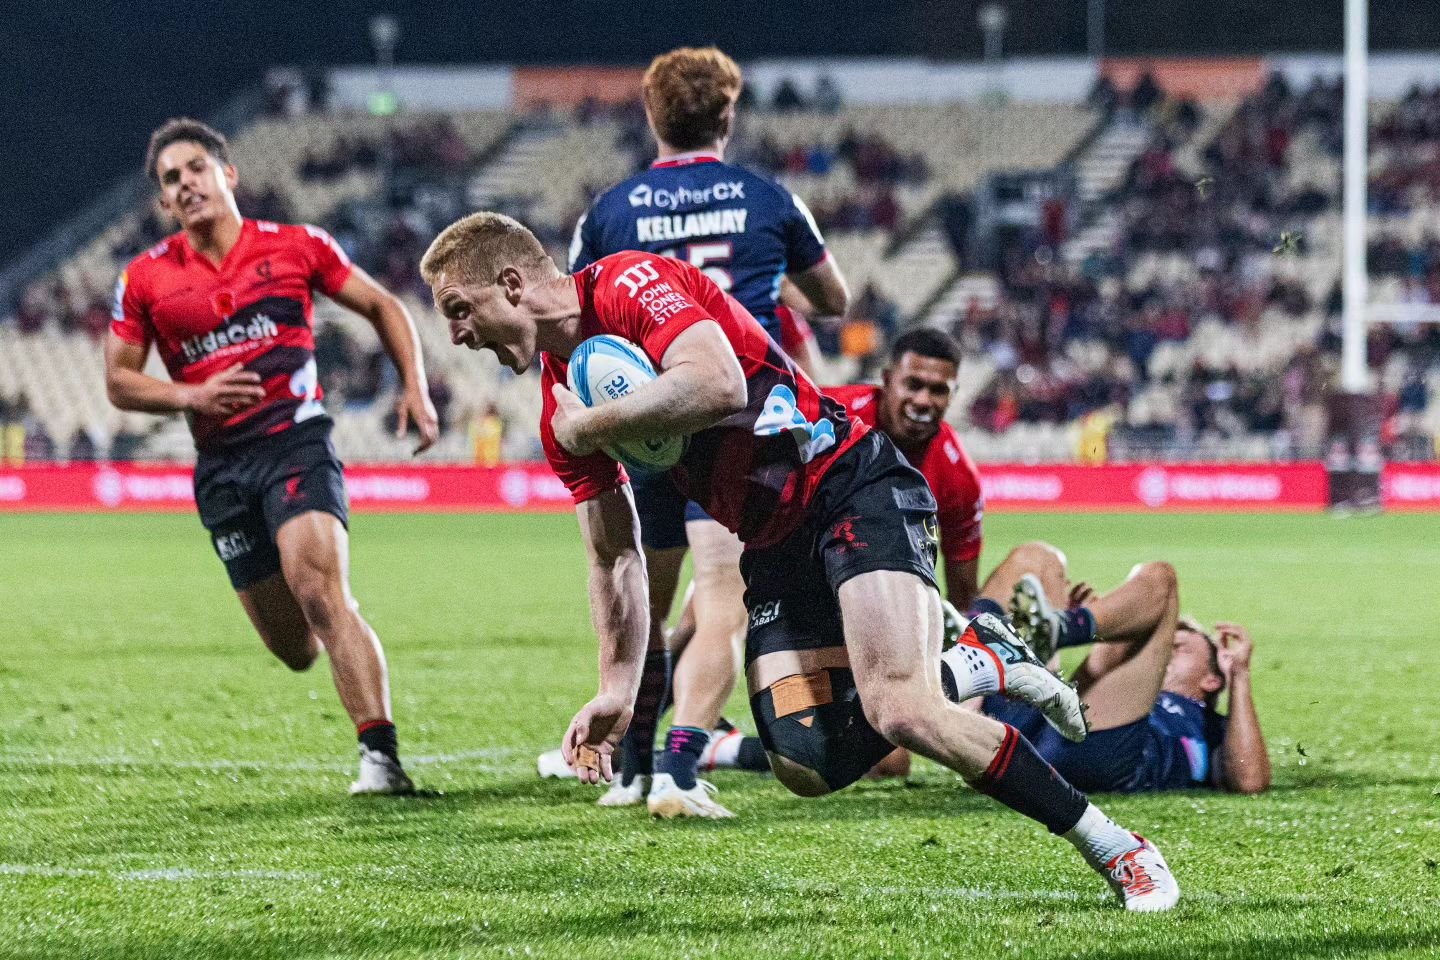 Photo highlights from yesterday's Super Rugby Pacific clash between the Crusaders and Melbourne Rebels in Christchurch at the Apollo Project's Stadium.

The Crusaders handed fourth placed Melbourne Rebels a massive reality check in the garden city as